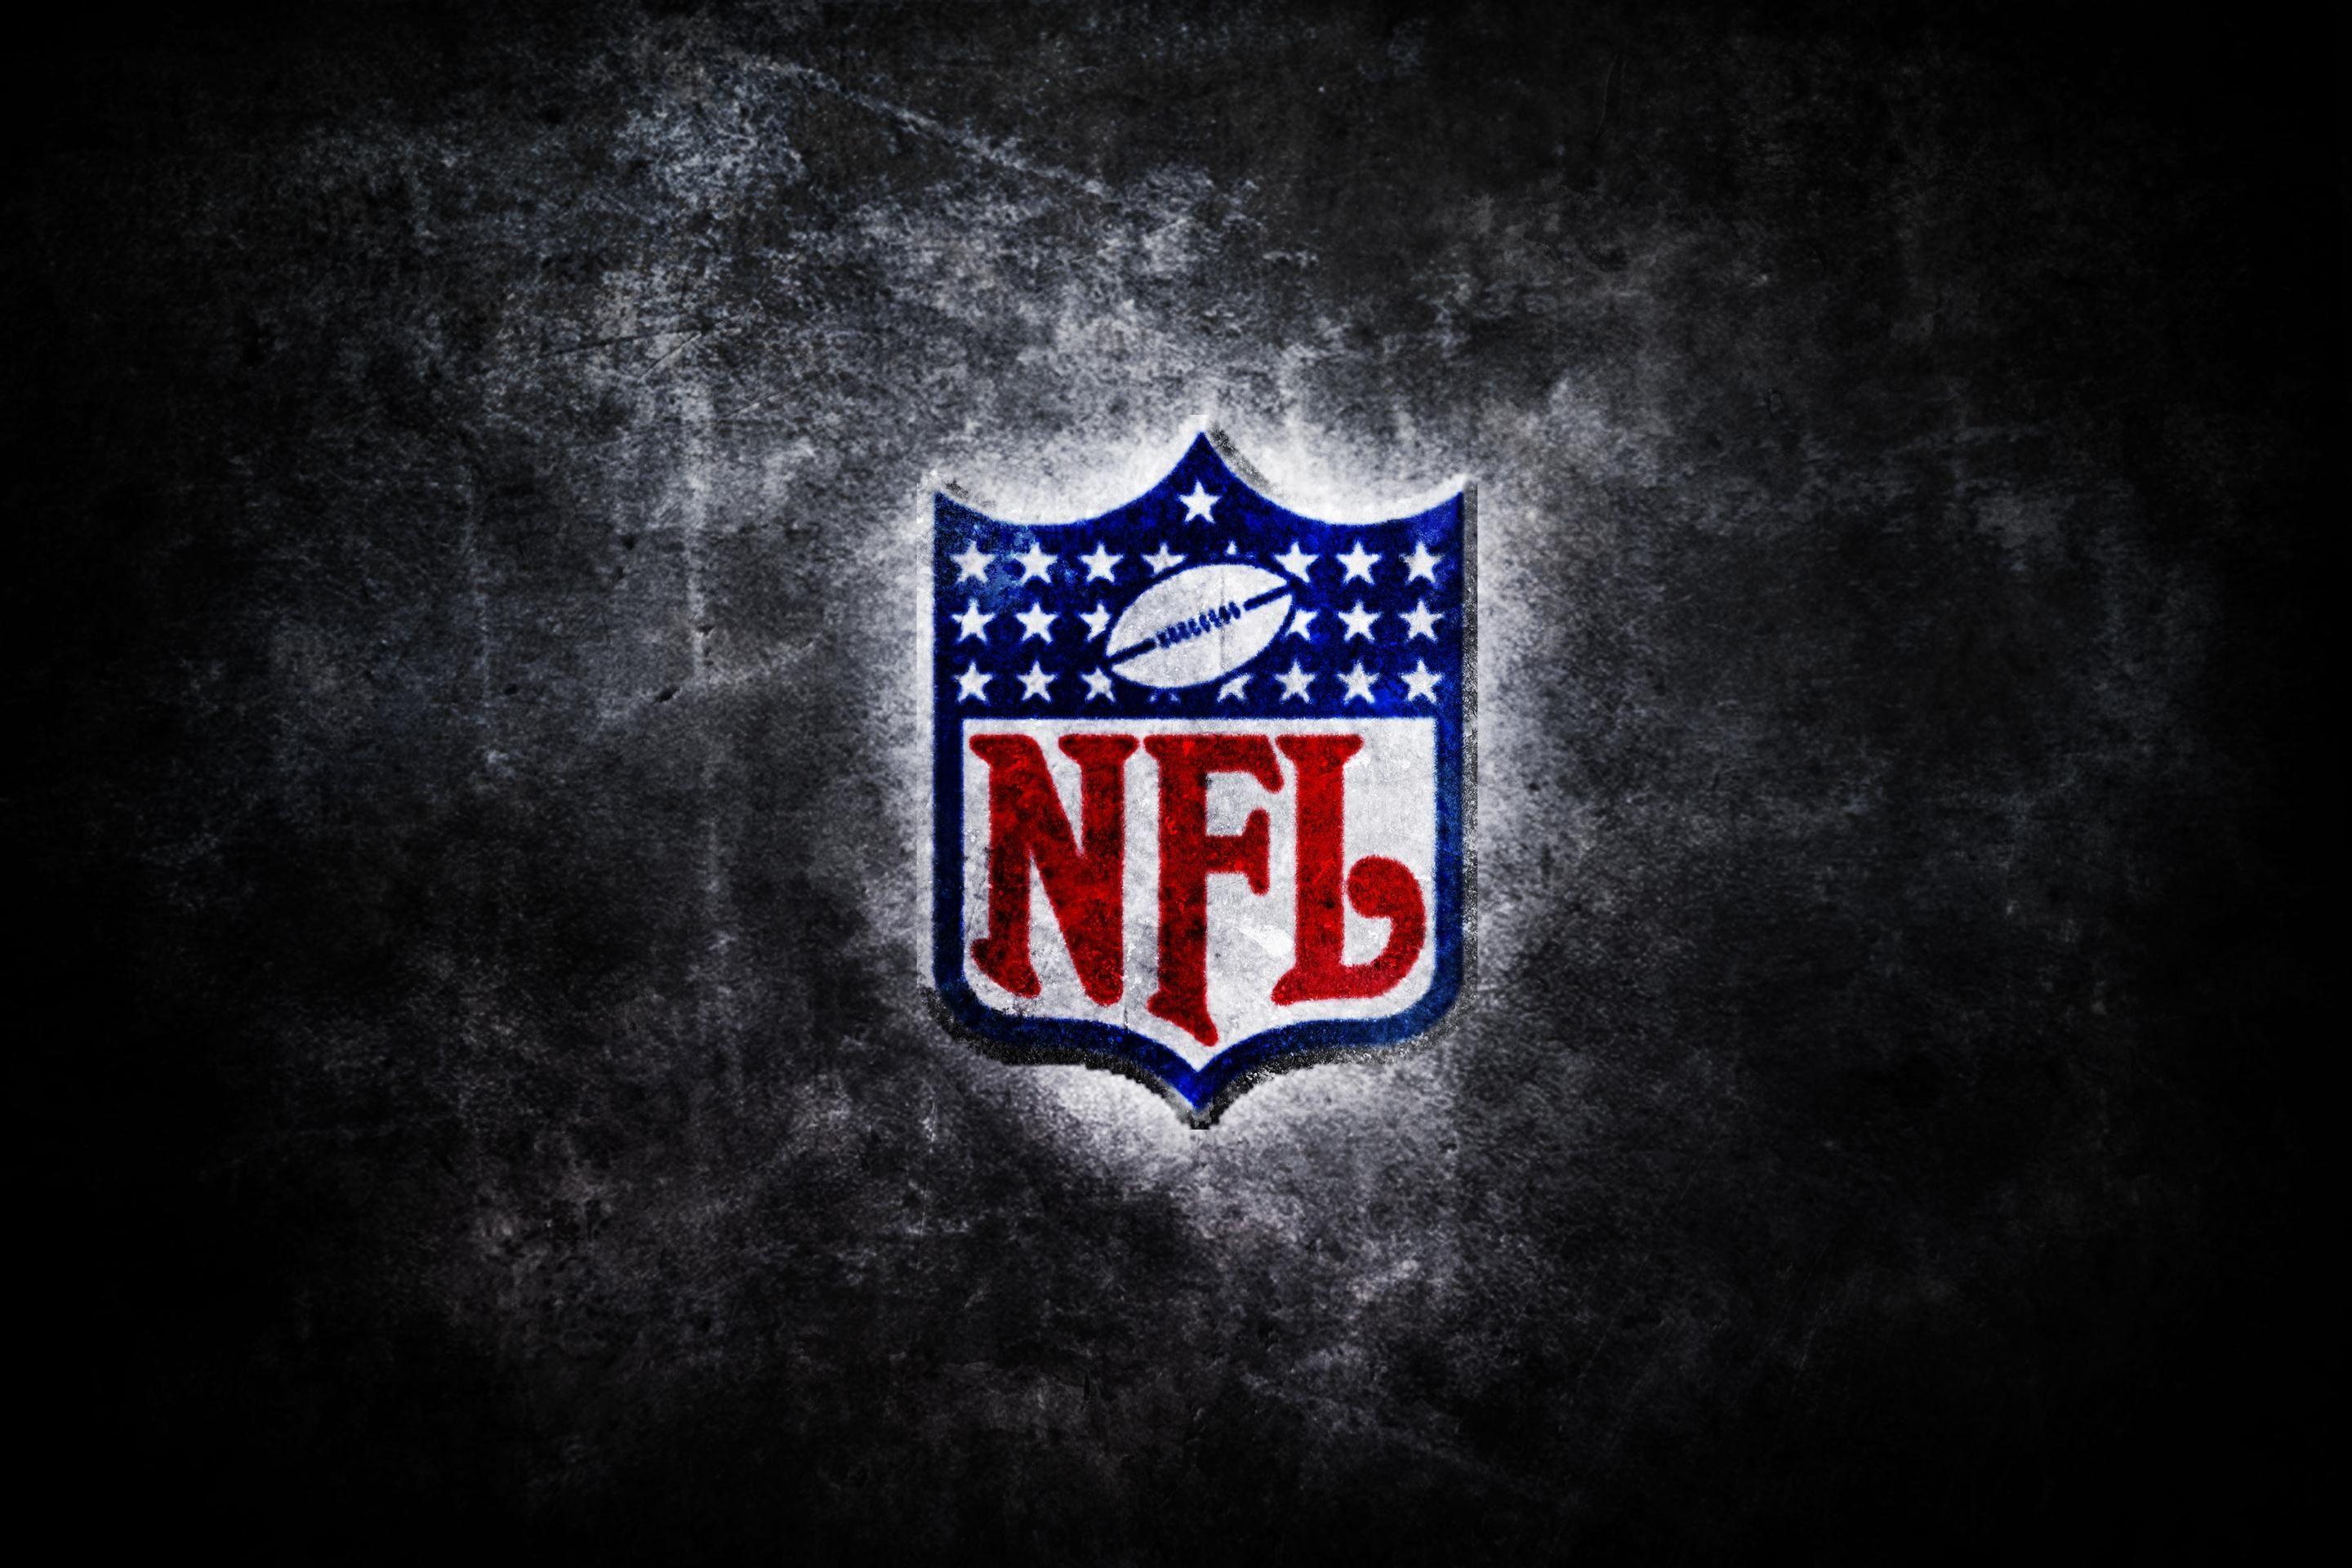 For all people who NFL here we have some nice wallpaper of some